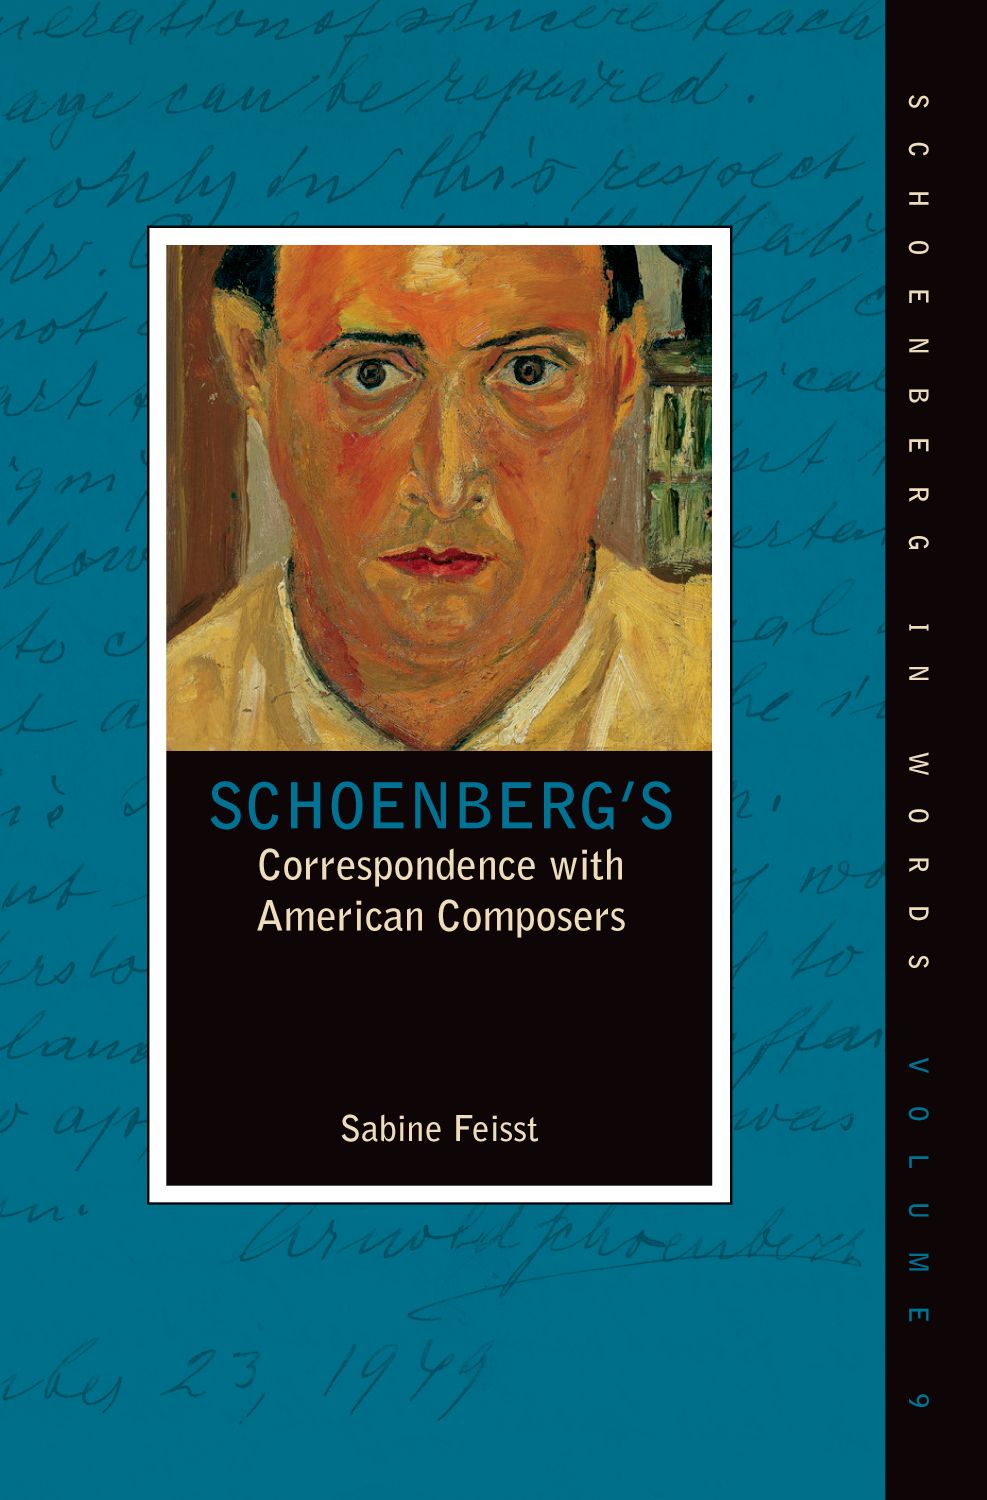 Schoenberg's Correspondence with American Composer: Reference